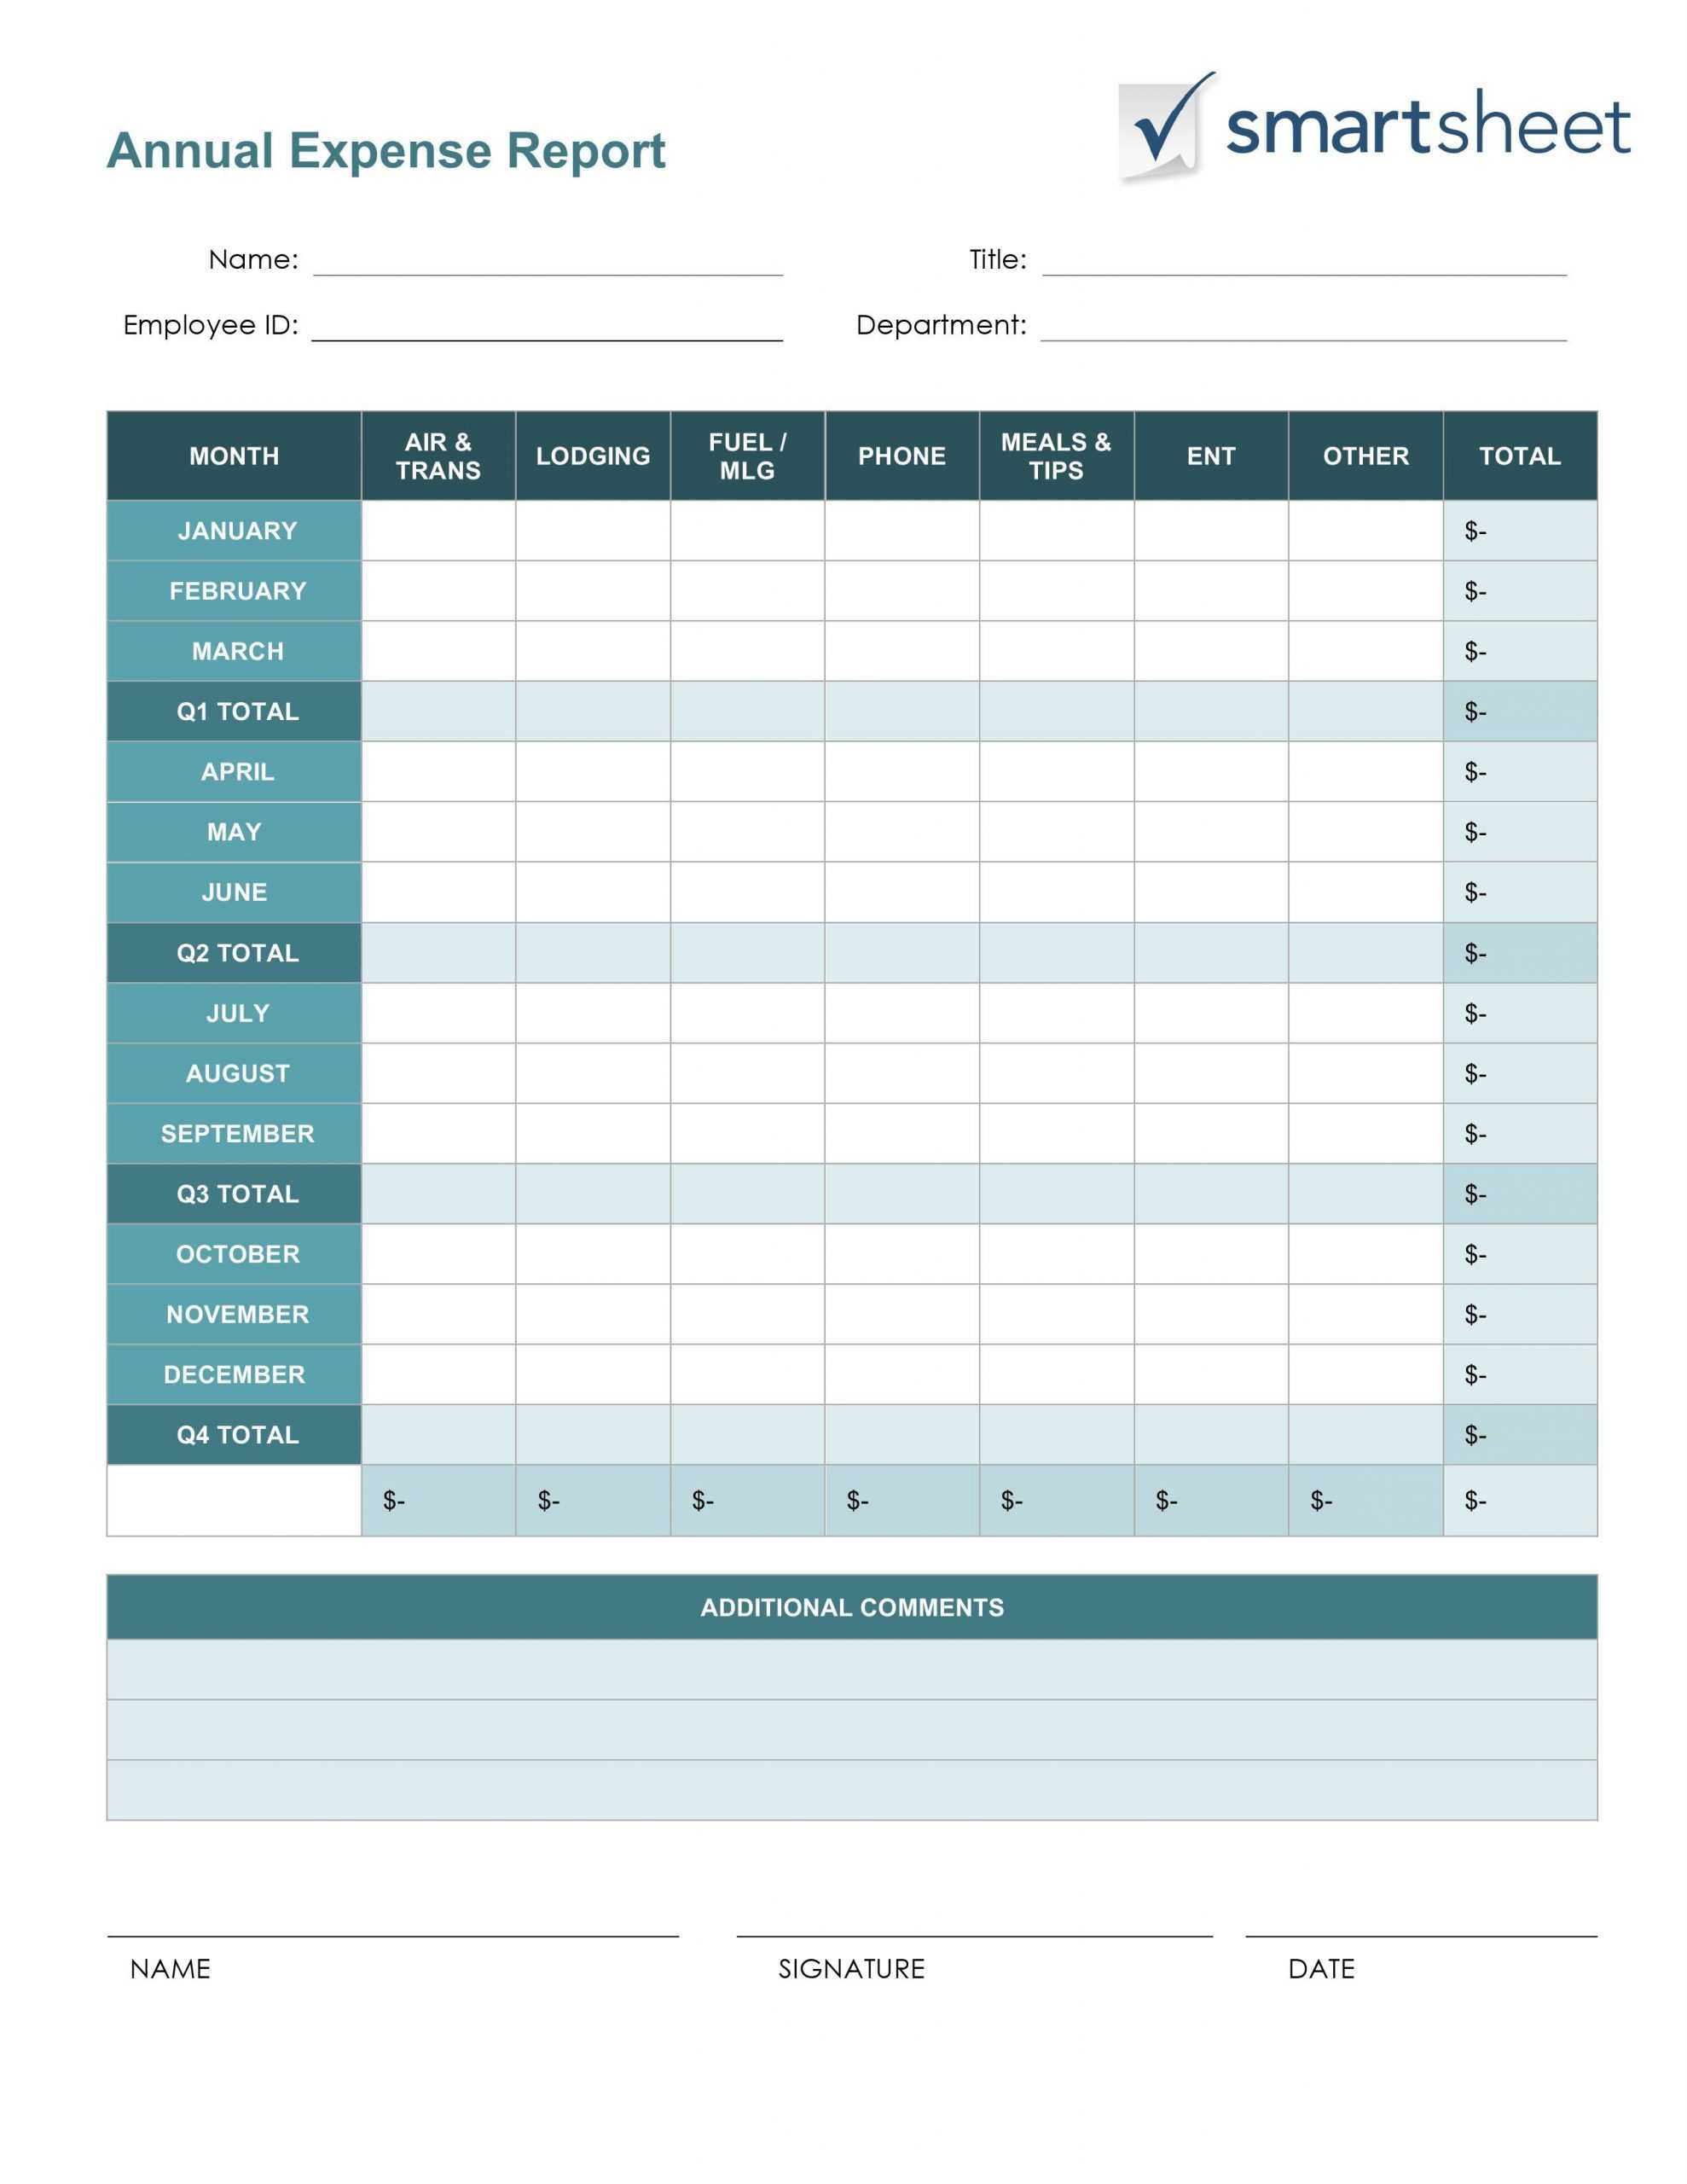 Sample Excel Budget Spreadsheet For Small Business Example Throughout Expense Report Template Excel 2010